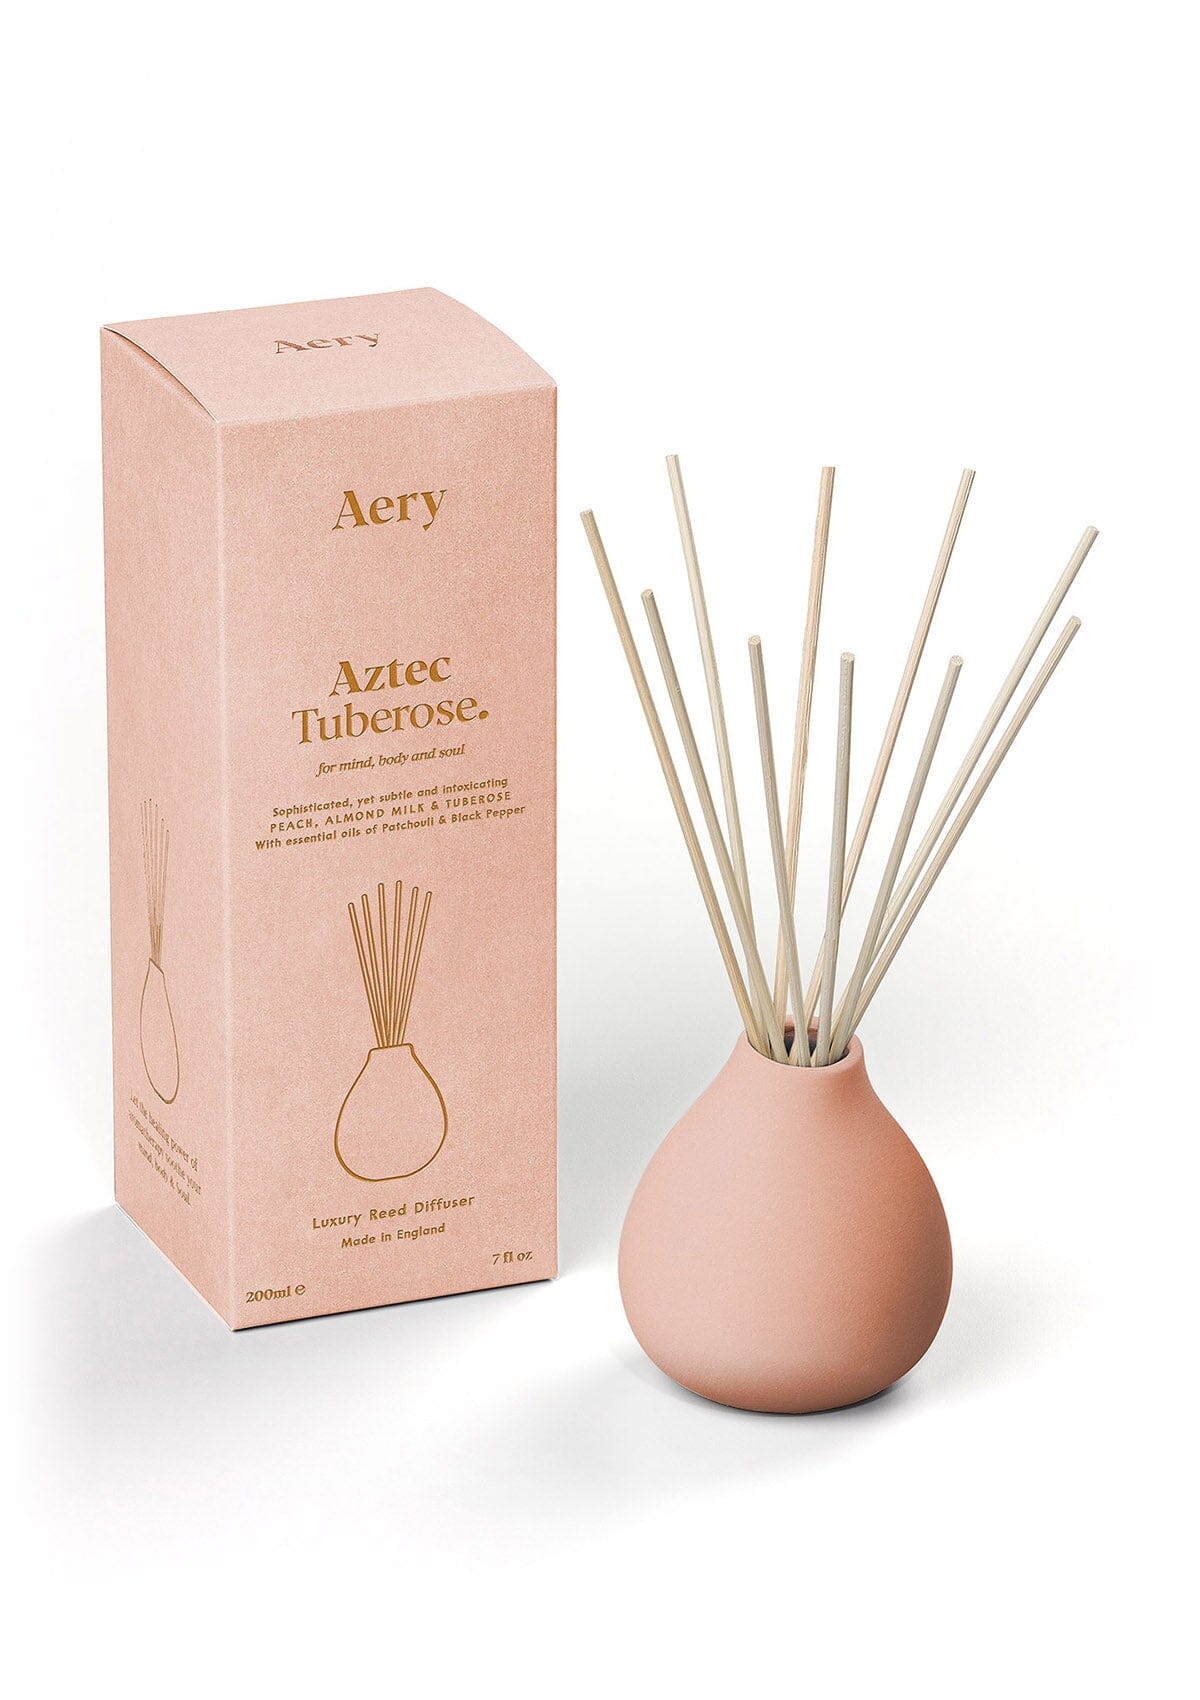 Peach Aztec Tuberose diffuser displayed next to product packaging by Aery on white background 